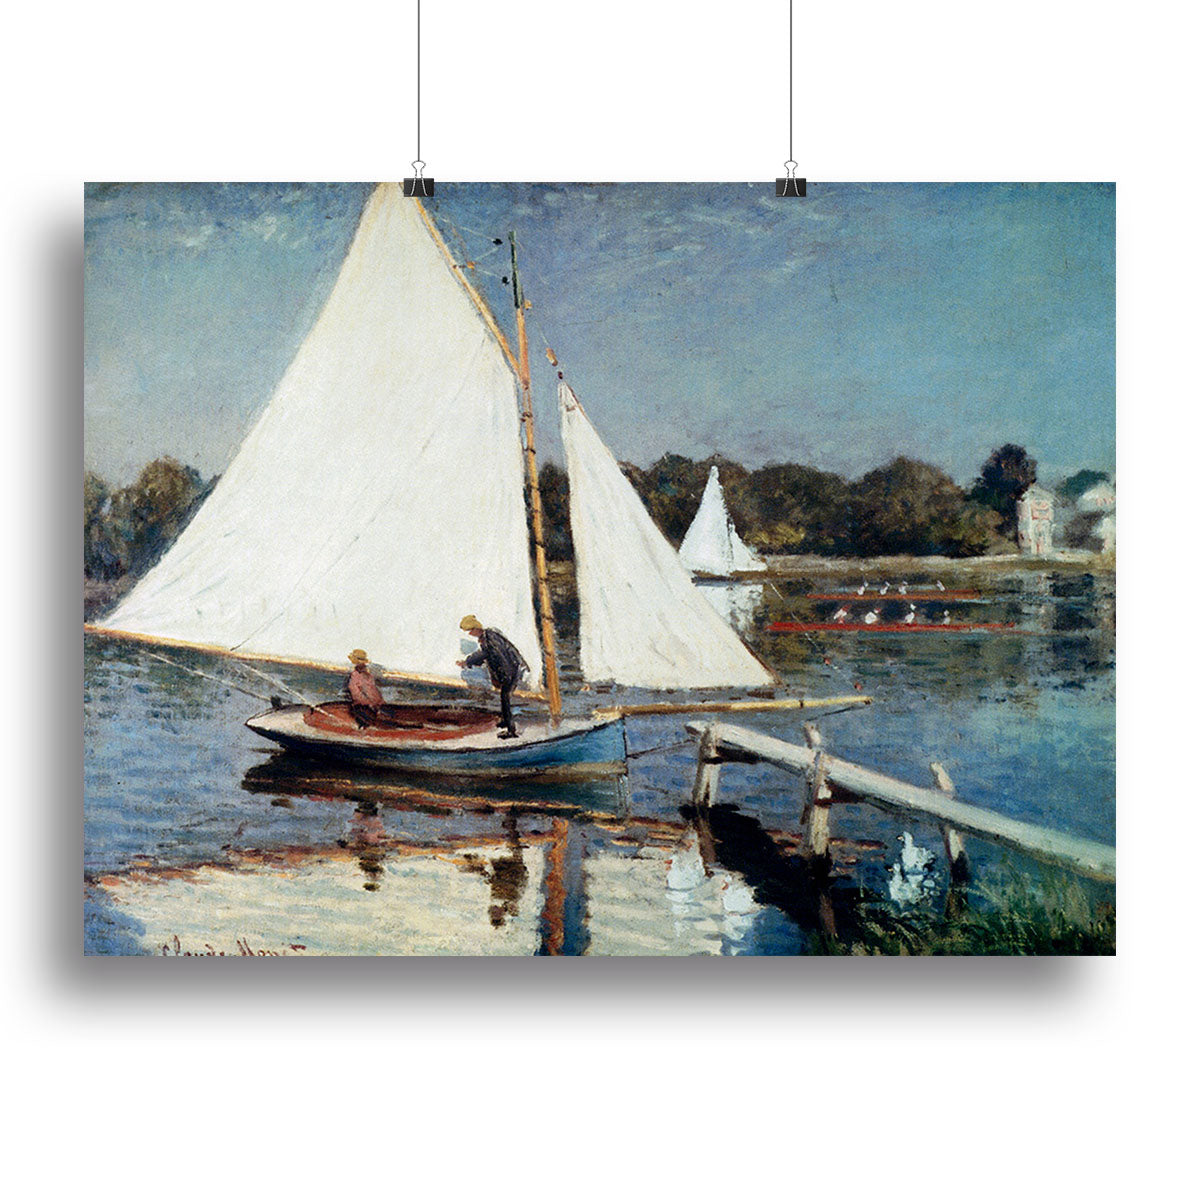 Sailing At Argenteuil 2 by Monet Canvas Print or Poster - Canvas Art Rocks - 2